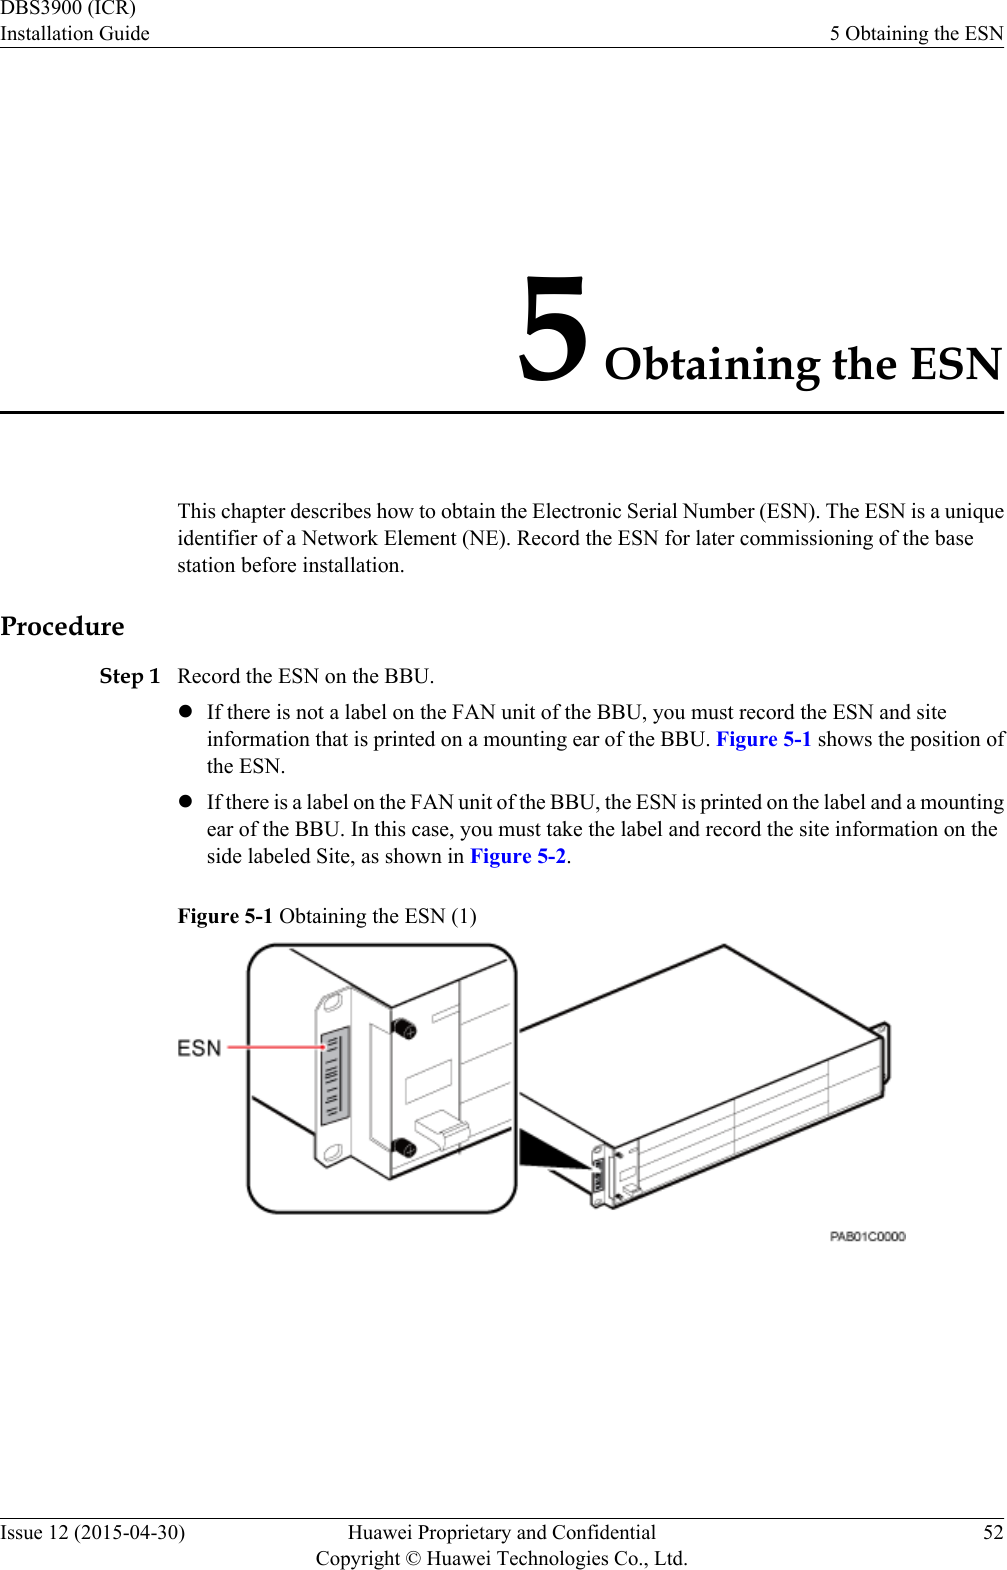 5 Obtaining the ESNThis chapter describes how to obtain the Electronic Serial Number (ESN). The ESN is a uniqueidentifier of a Network Element (NE). Record the ESN for later commissioning of the basestation before installation.ProcedureStep 1 Record the ESN on the BBU.lIf there is not a label on the FAN unit of the BBU, you must record the ESN and siteinformation that is printed on a mounting ear of the BBU. Figure 5-1 shows the position ofthe ESN.lIf there is a label on the FAN unit of the BBU, the ESN is printed on the label and a mountingear of the BBU. In this case, you must take the label and record the site information on theside labeled Site, as shown in Figure 5-2.Figure 5-1 Obtaining the ESN (1) DBS3900 (ICR)Installation Guide 5 Obtaining the ESNIssue 12 (2015-04-30) Huawei Proprietary and ConfidentialCopyright © Huawei Technologies Co., Ltd.52